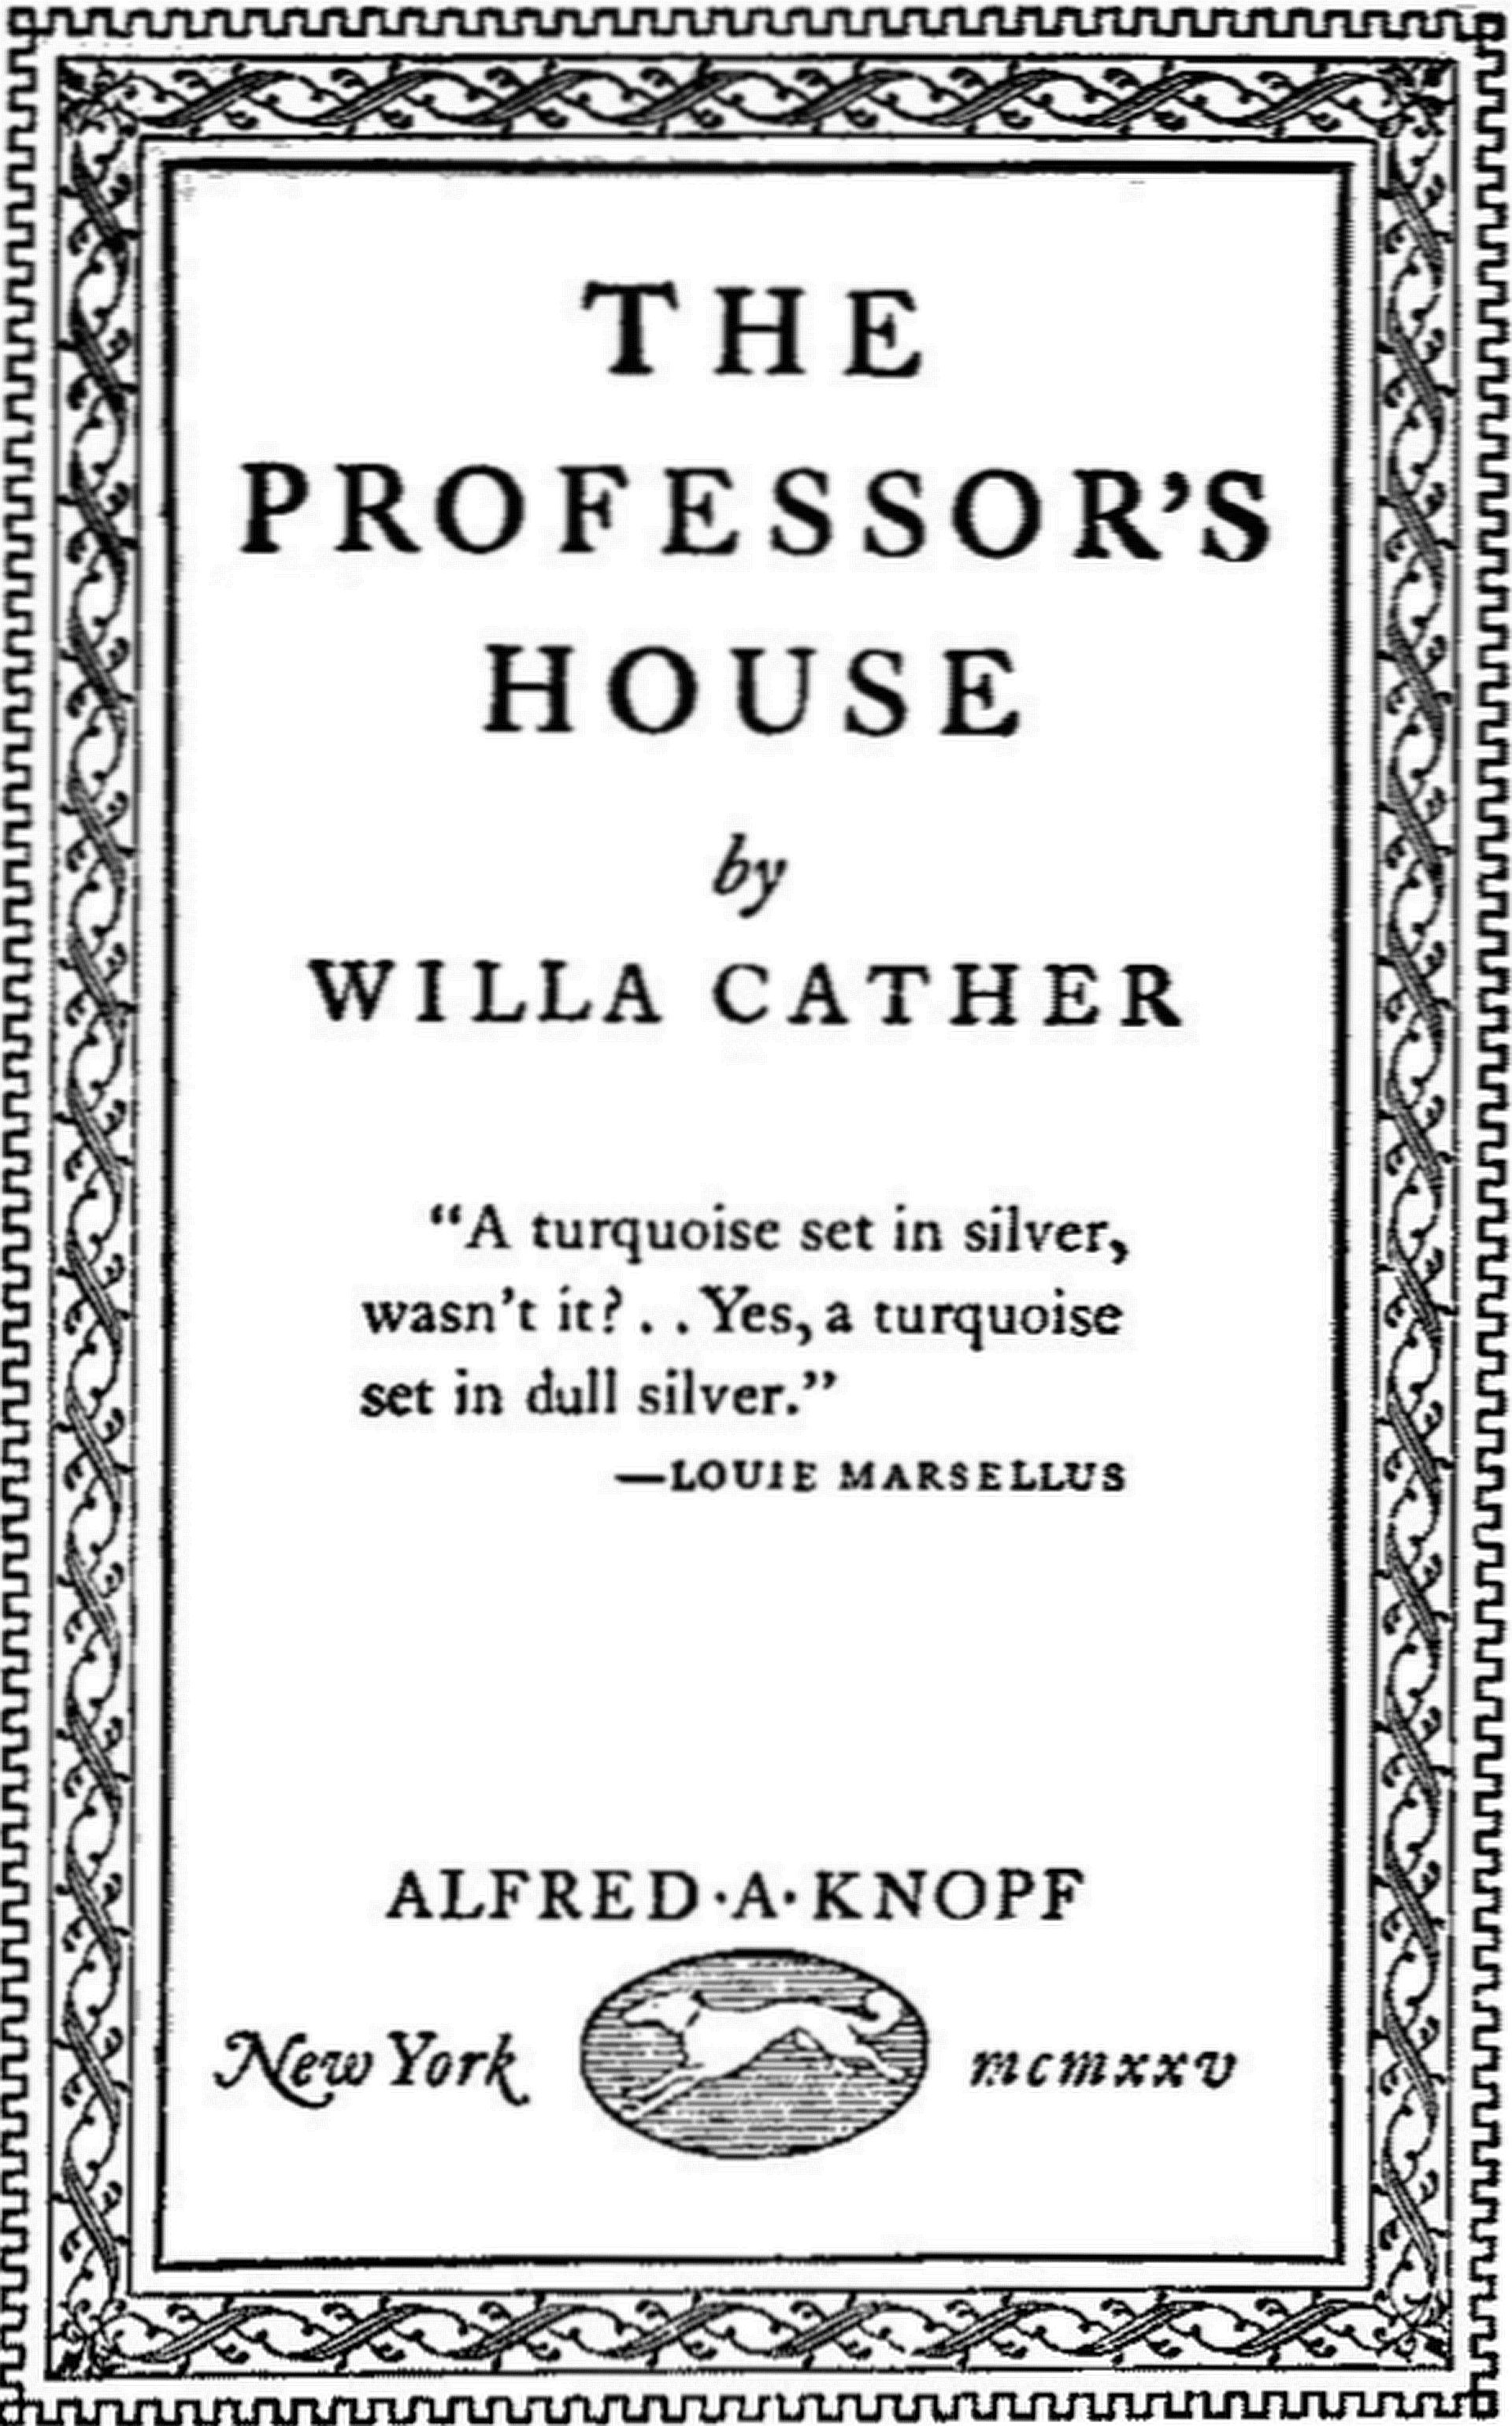 The Project Gutenberg eBook of The Professor's House, by Willa Cather.